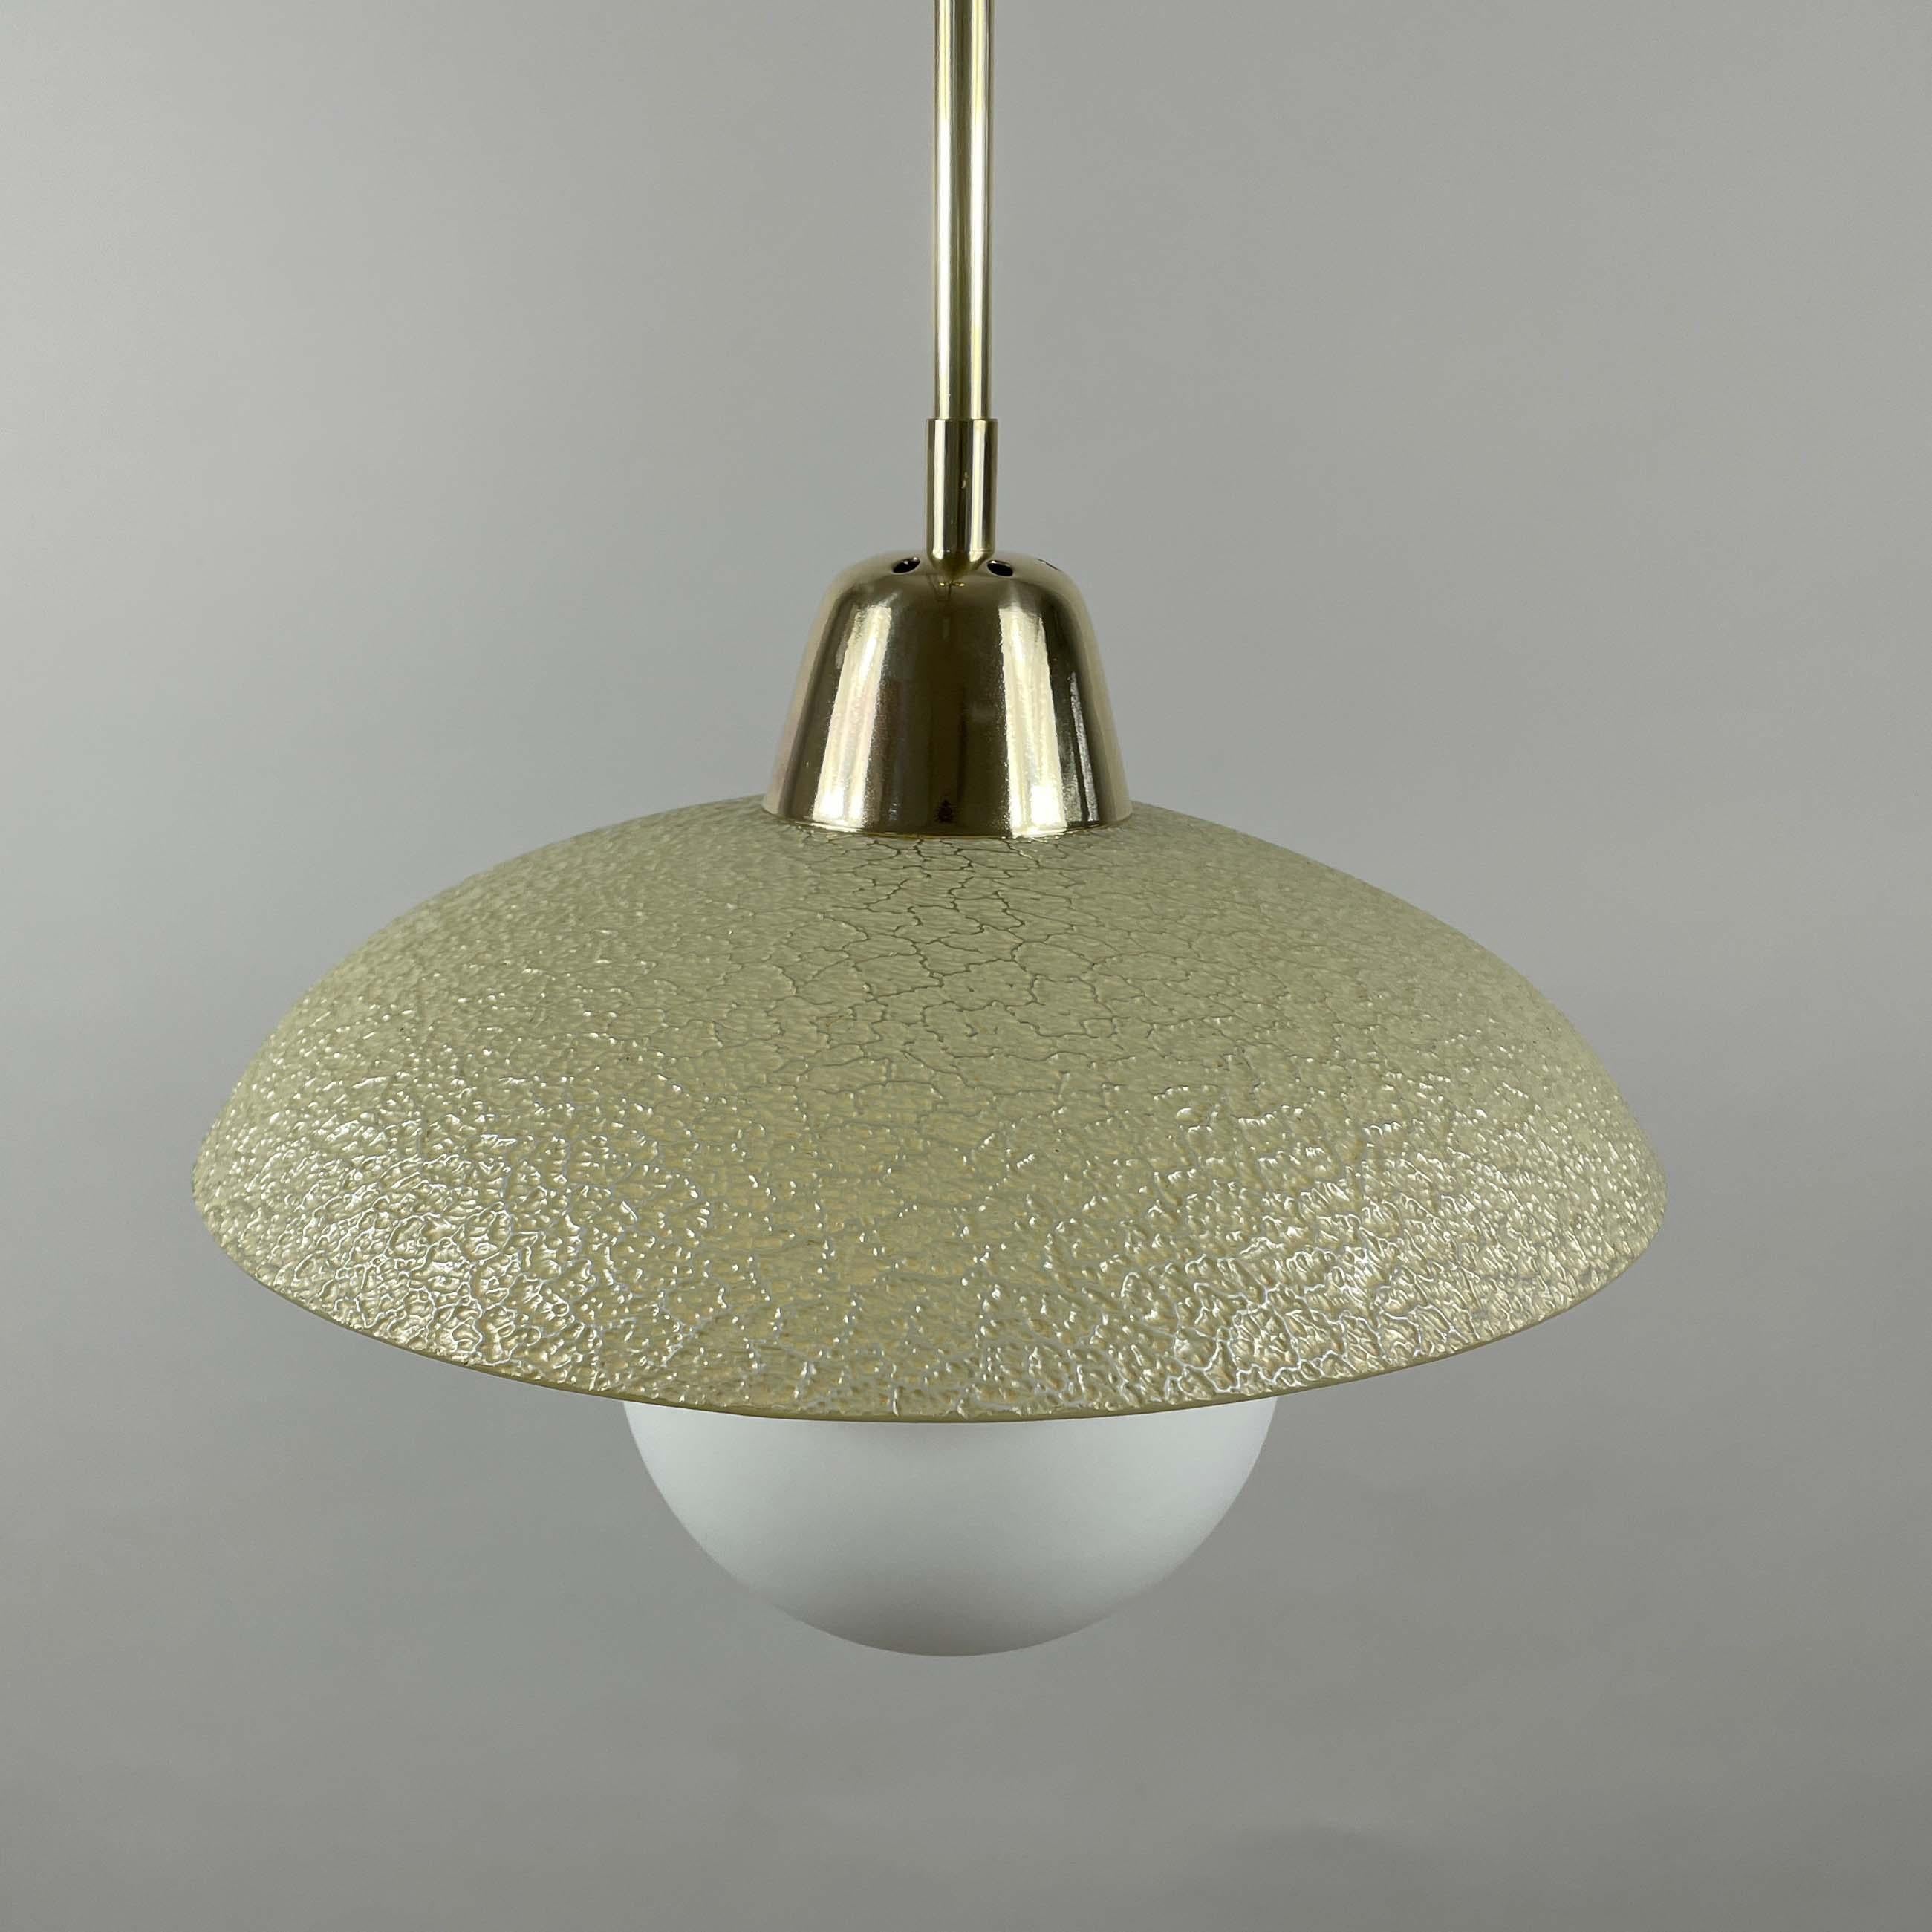 Cream Textured Glass and Brass Pendants, Sweden 1940s to 1950s For Sale 3